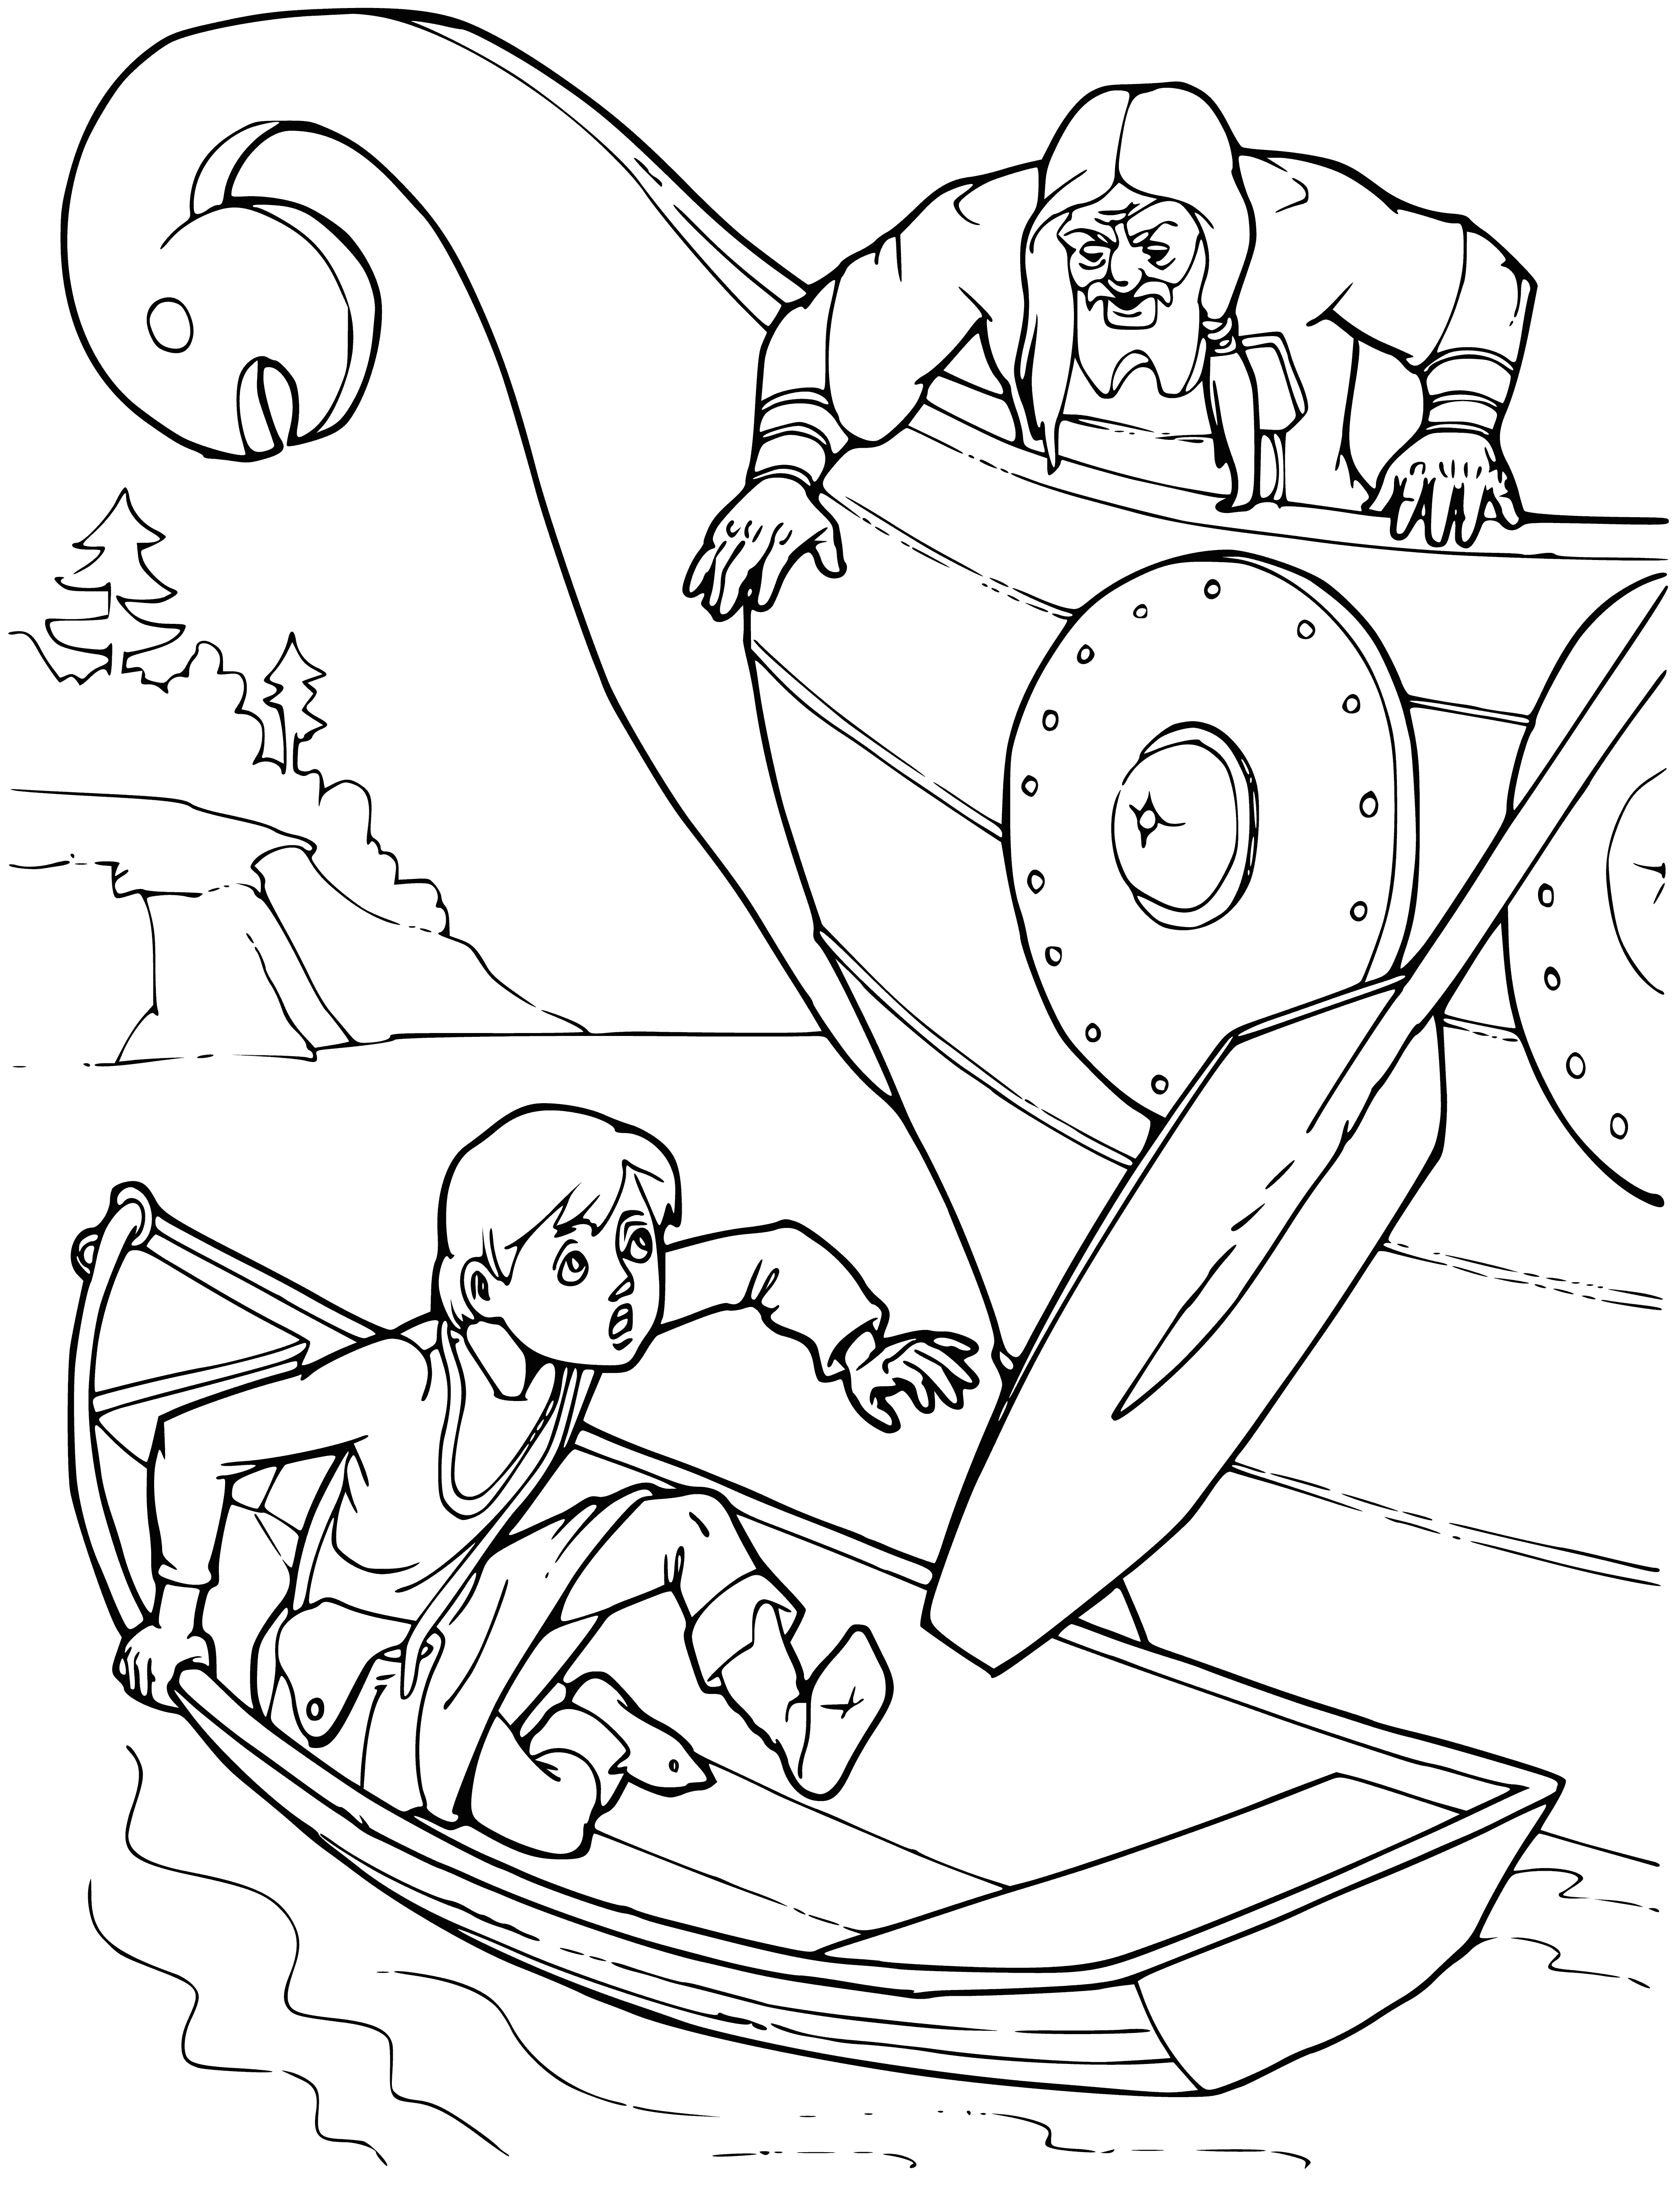 coloring page: Prince Vladimir - Aleksha sailing on a lake on a white boat, wearing blue shirt, white pants, and blue hat, reading a blue book, scarf around his neck.